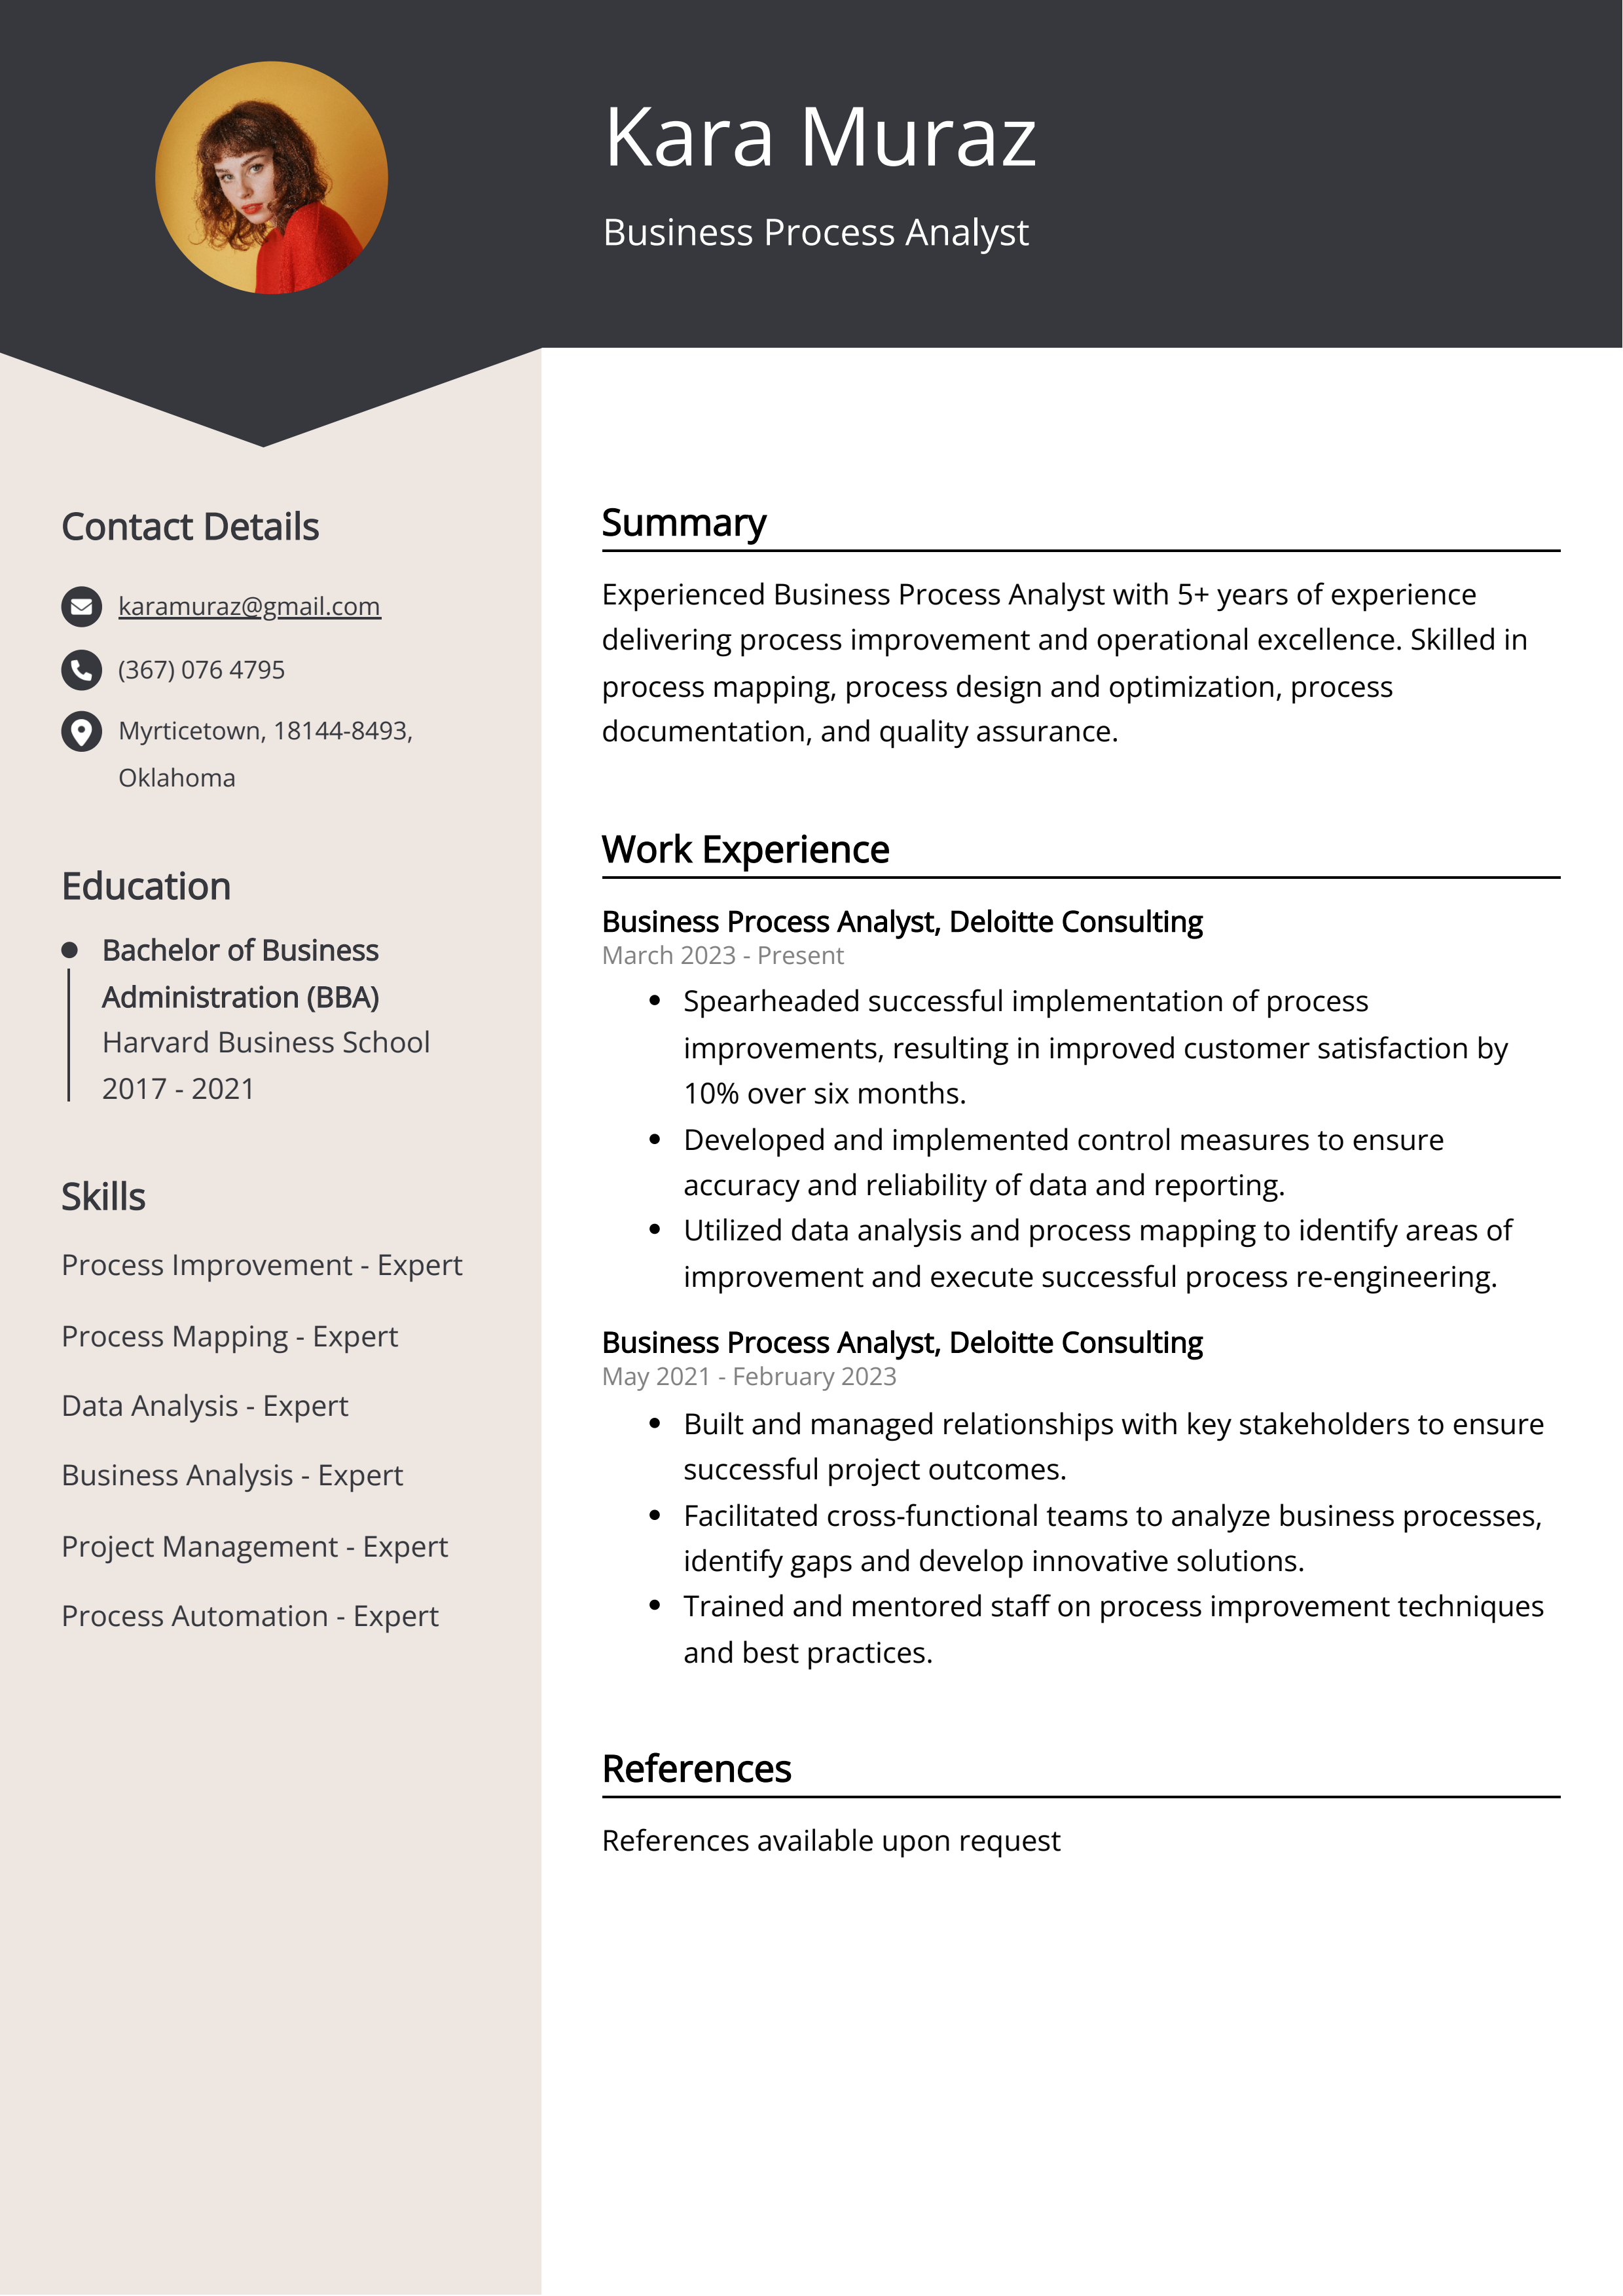 Business Process Analyst CV Example